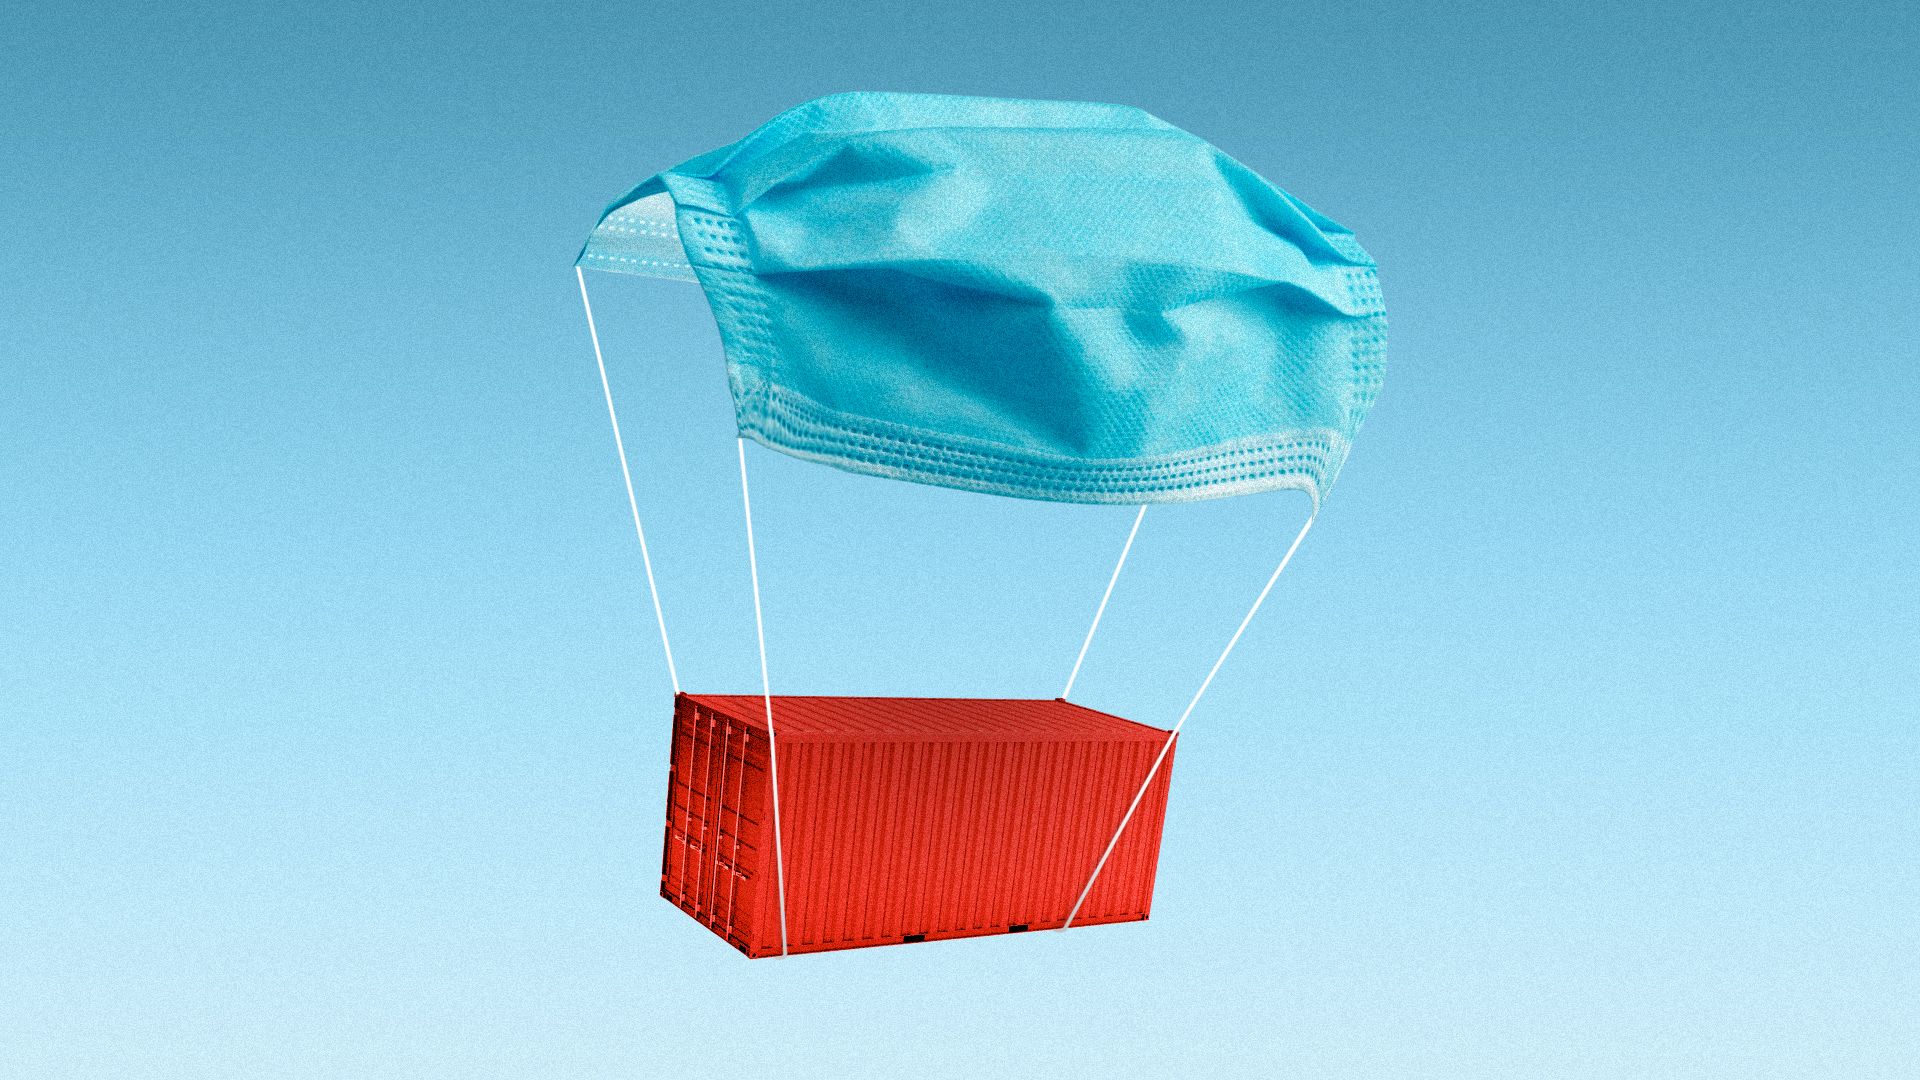 Illustration of a shipping container with a surgical mask as a parachute